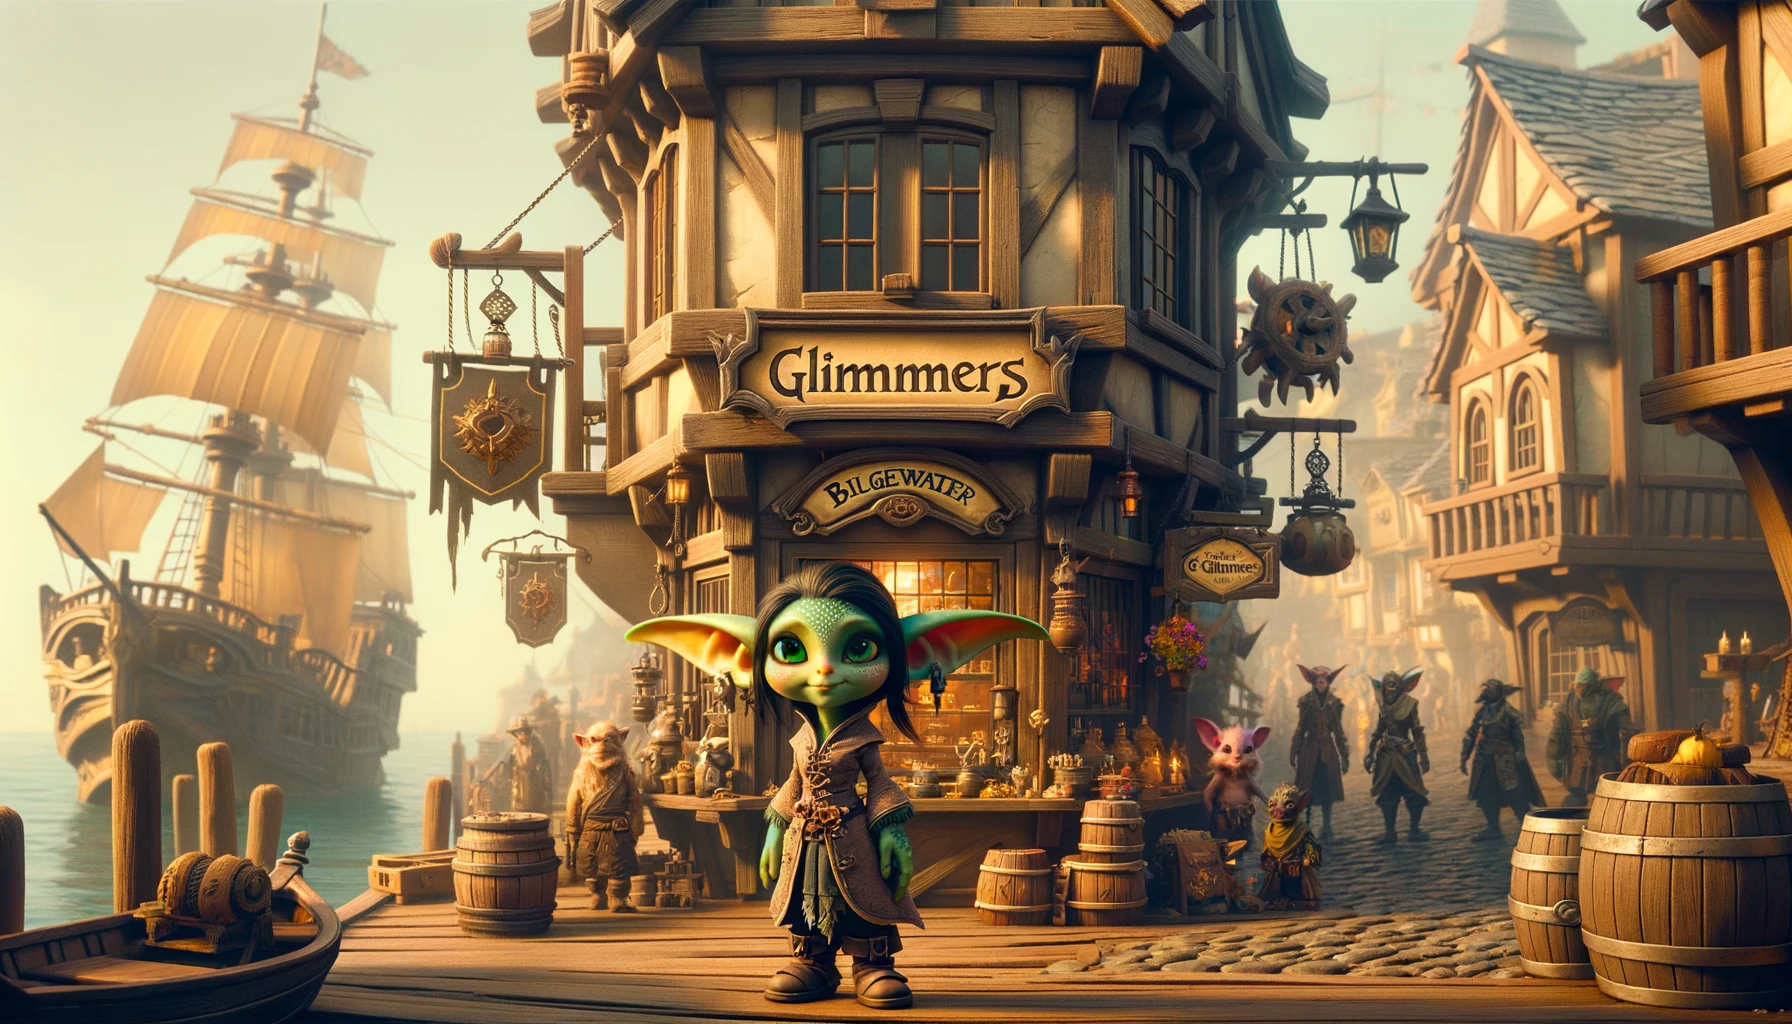 Photo-style image of Bilgewater Harbor during the day, bustling with sailors, traders, and adventurers. In the foreground, the corner shop 'Glim's Glimmers' stands out, and standing in front of it is Glim, a petite goblin with emerald eyes, a sly grin, and attire reflecting her status as a shopkeeper of rare items.